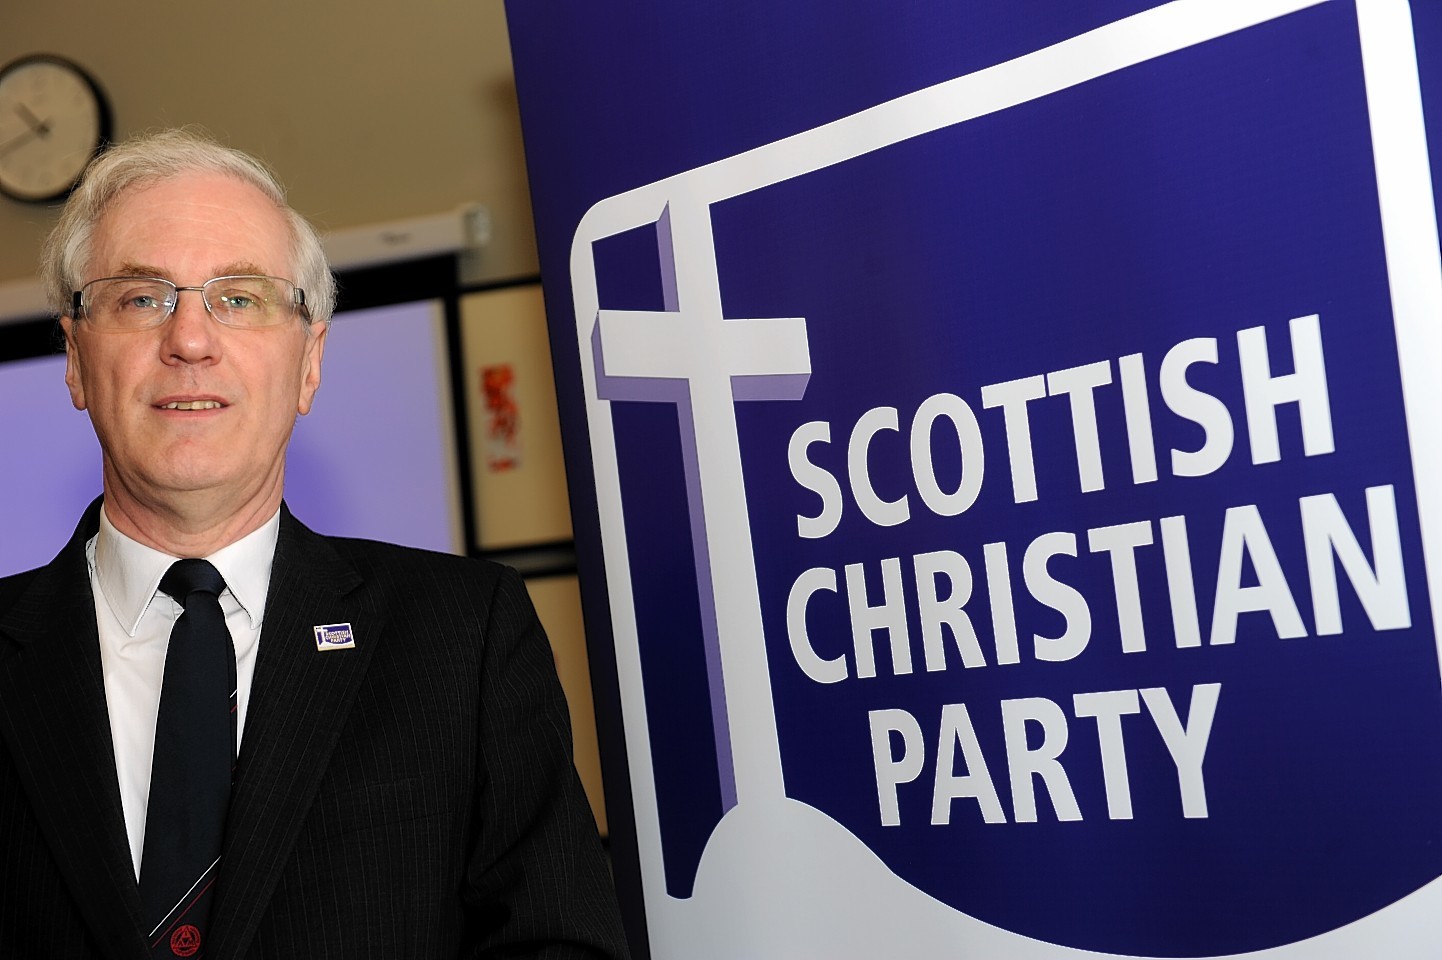 Dr Donald Boyd, leader of the Scottish Christian Party, launching their manifesto at Eden Court, Inverness, in April